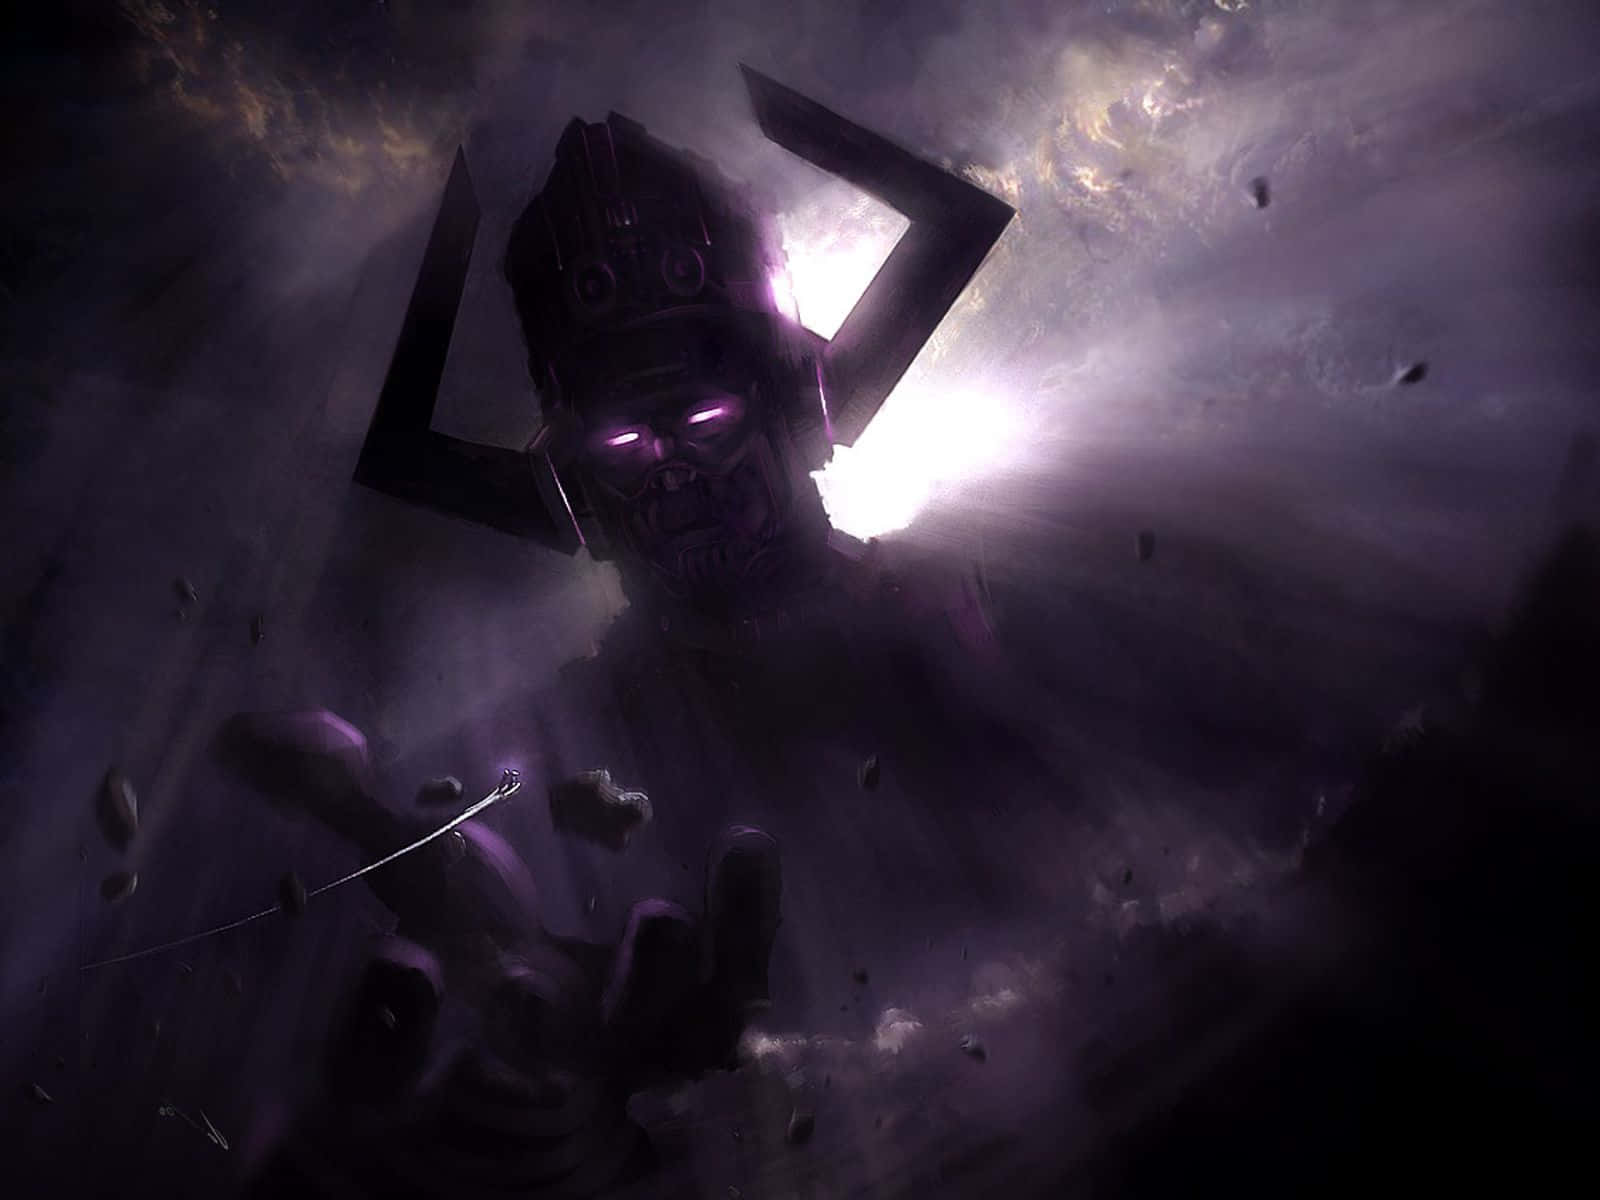 Galactus, The Devourer of Worlds, stands strong and imposing in this stunning image. Wallpaper